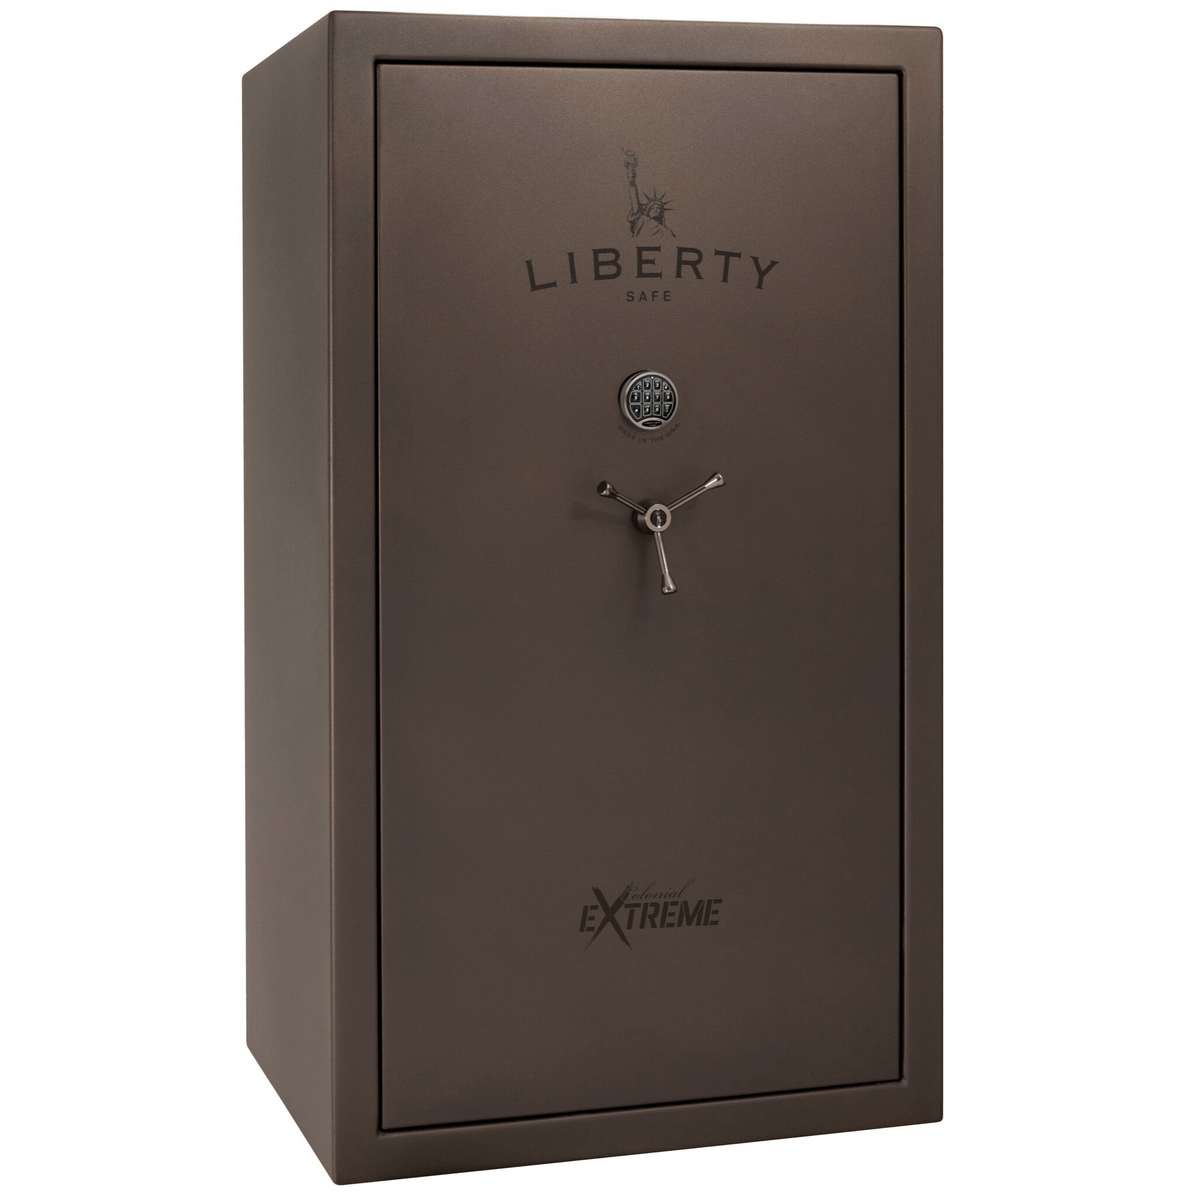 Liberty Colonial 50 Extreme Safe in Textured Bronze with Black Chrome Electronic Lock.